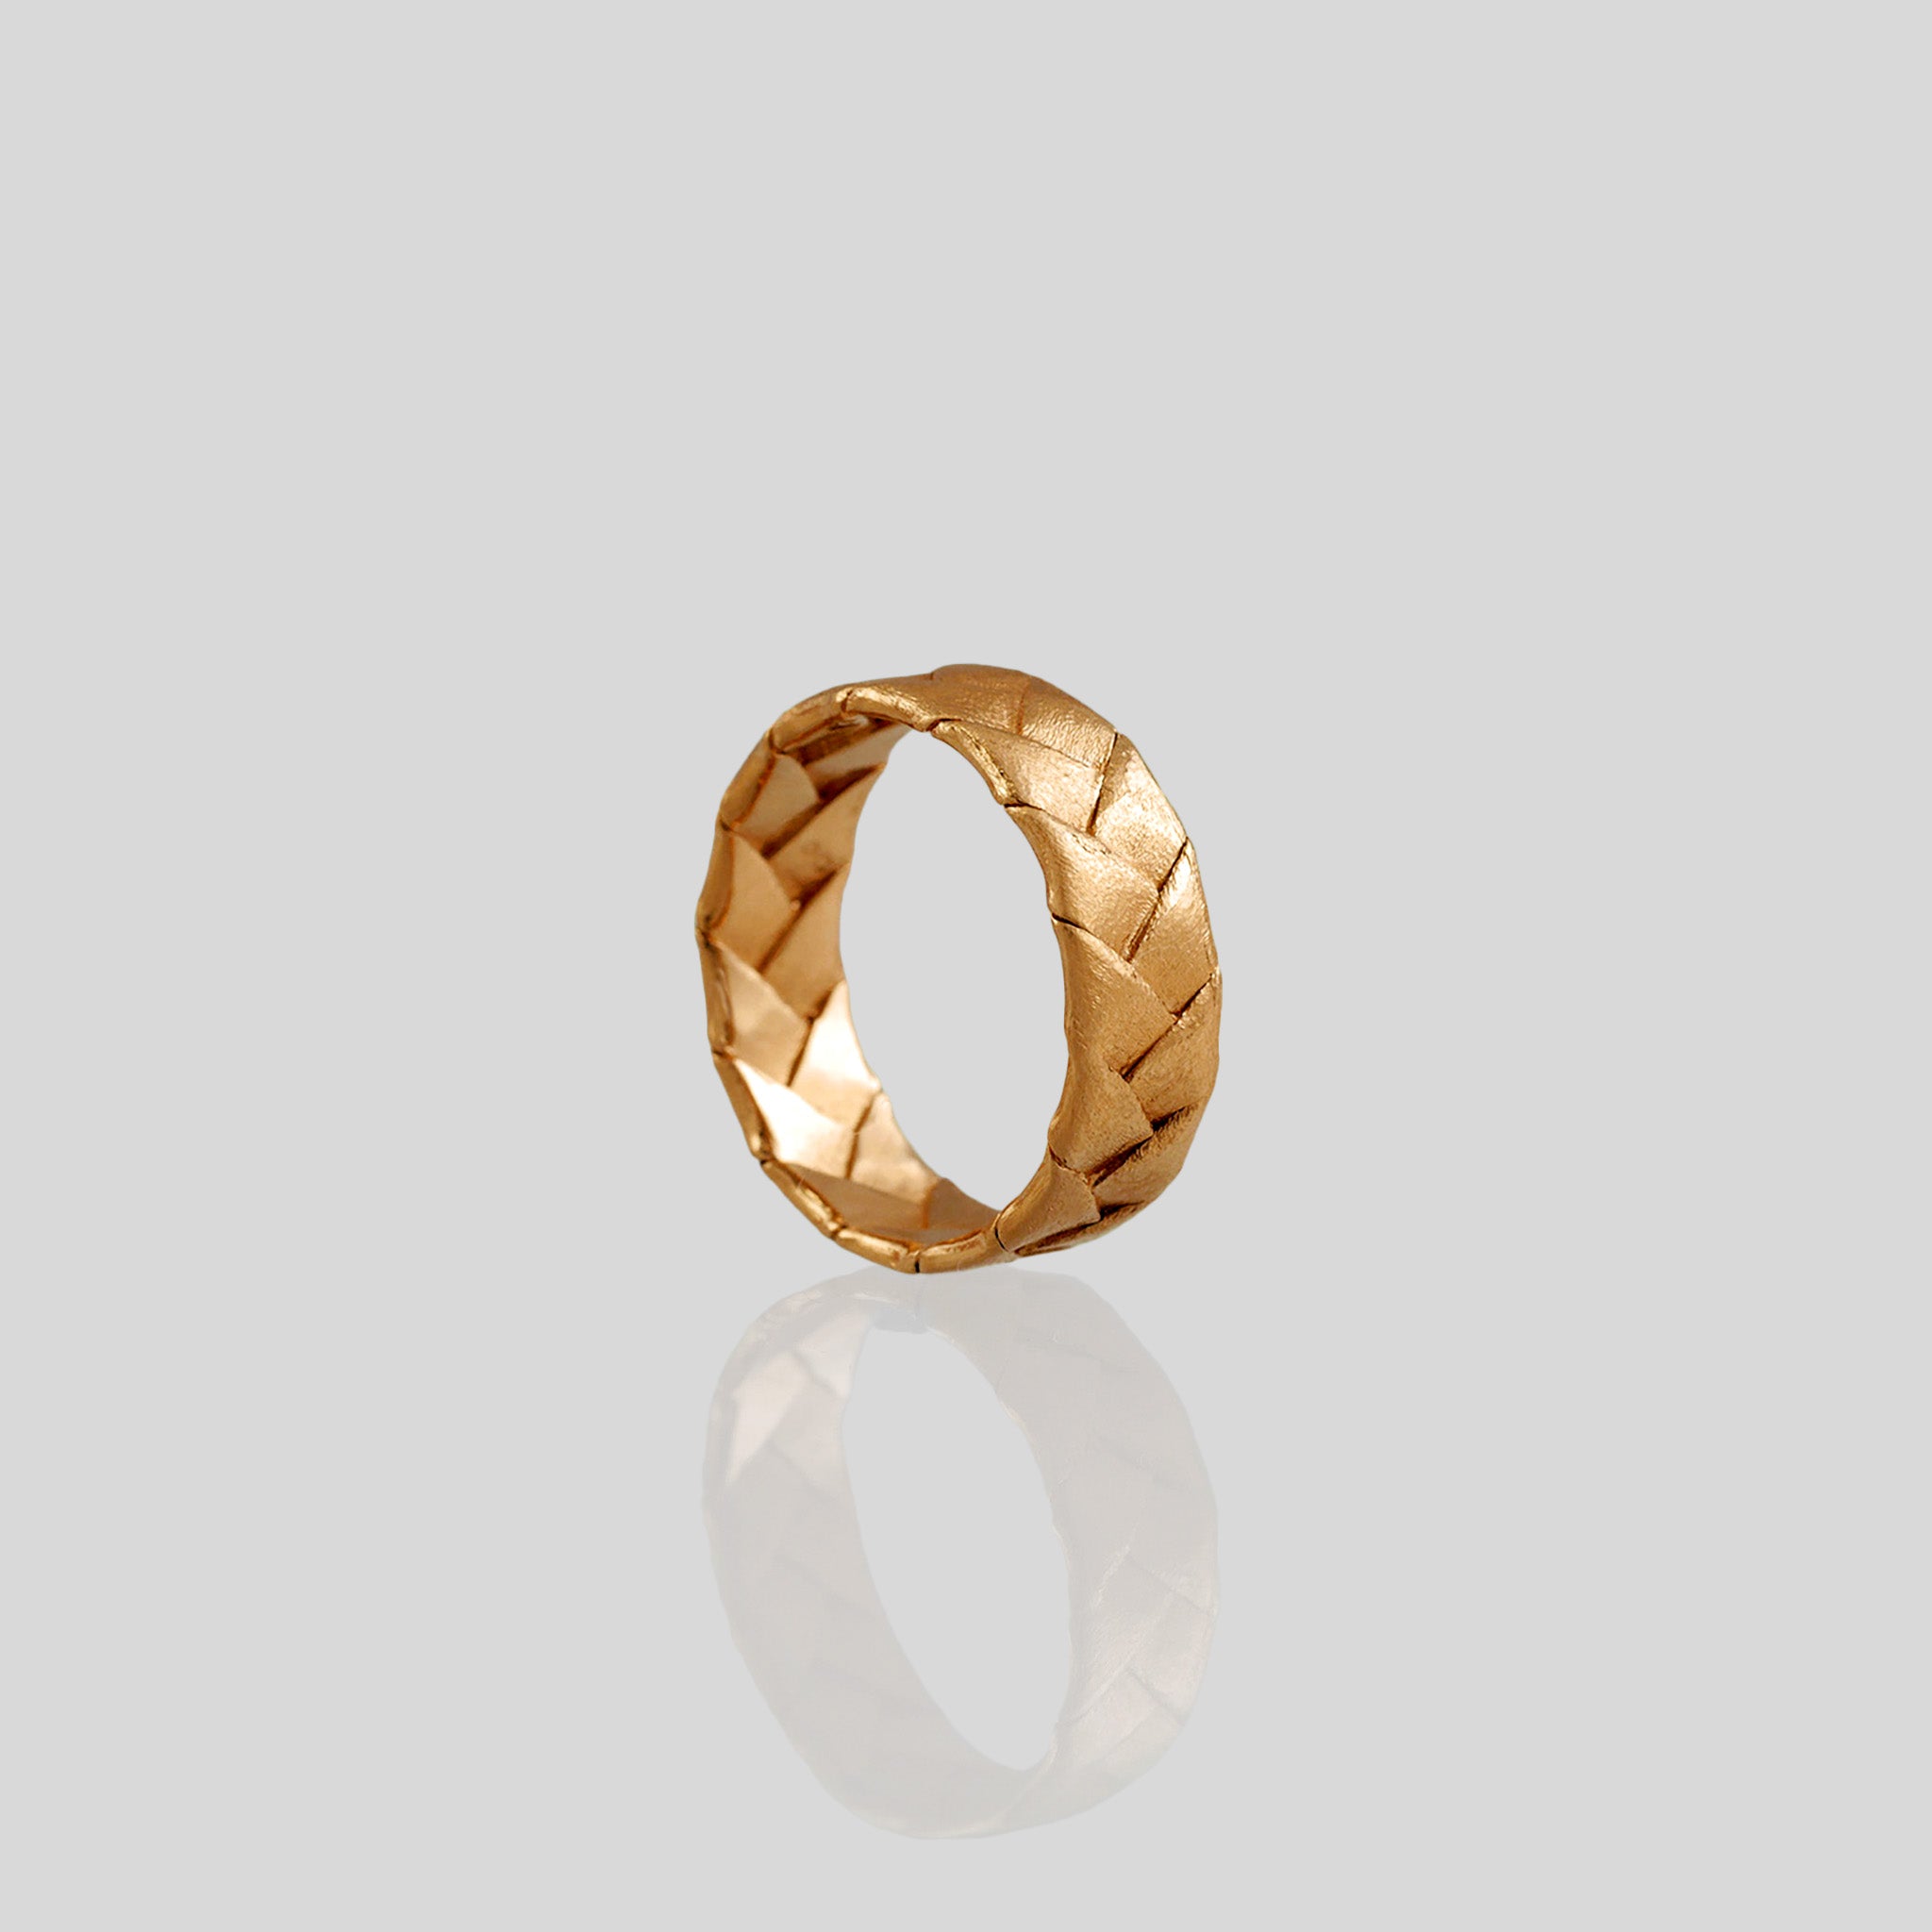 Rose Gold Braid Ring crafted from intertwined gold strands, meticulously modeled using a unique paper processing technique. Clean, precise, and versatile, suitable for daily wear.